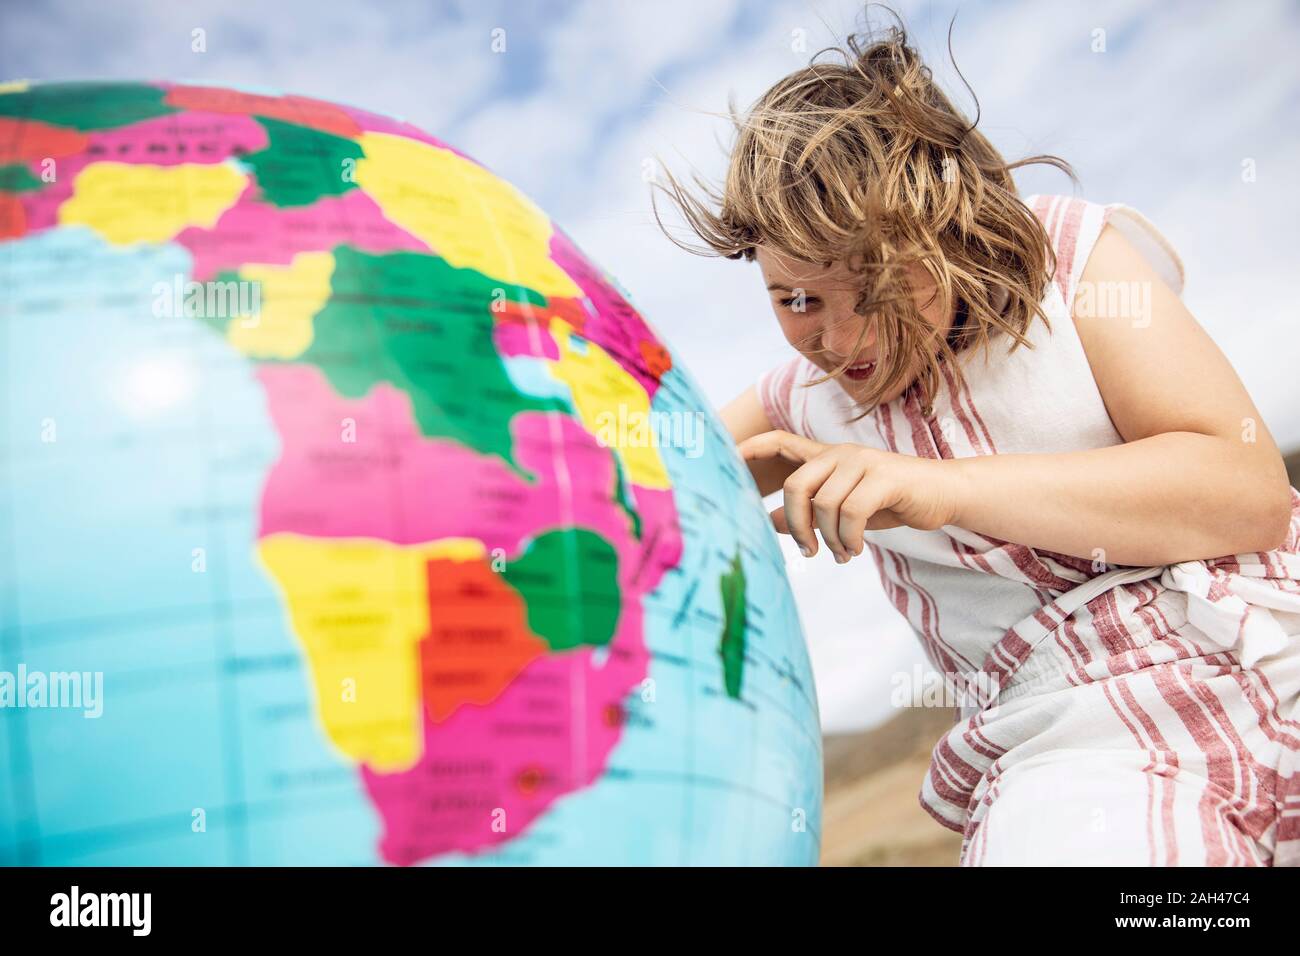 Little girl pointing on inflatable globe Stock Photo